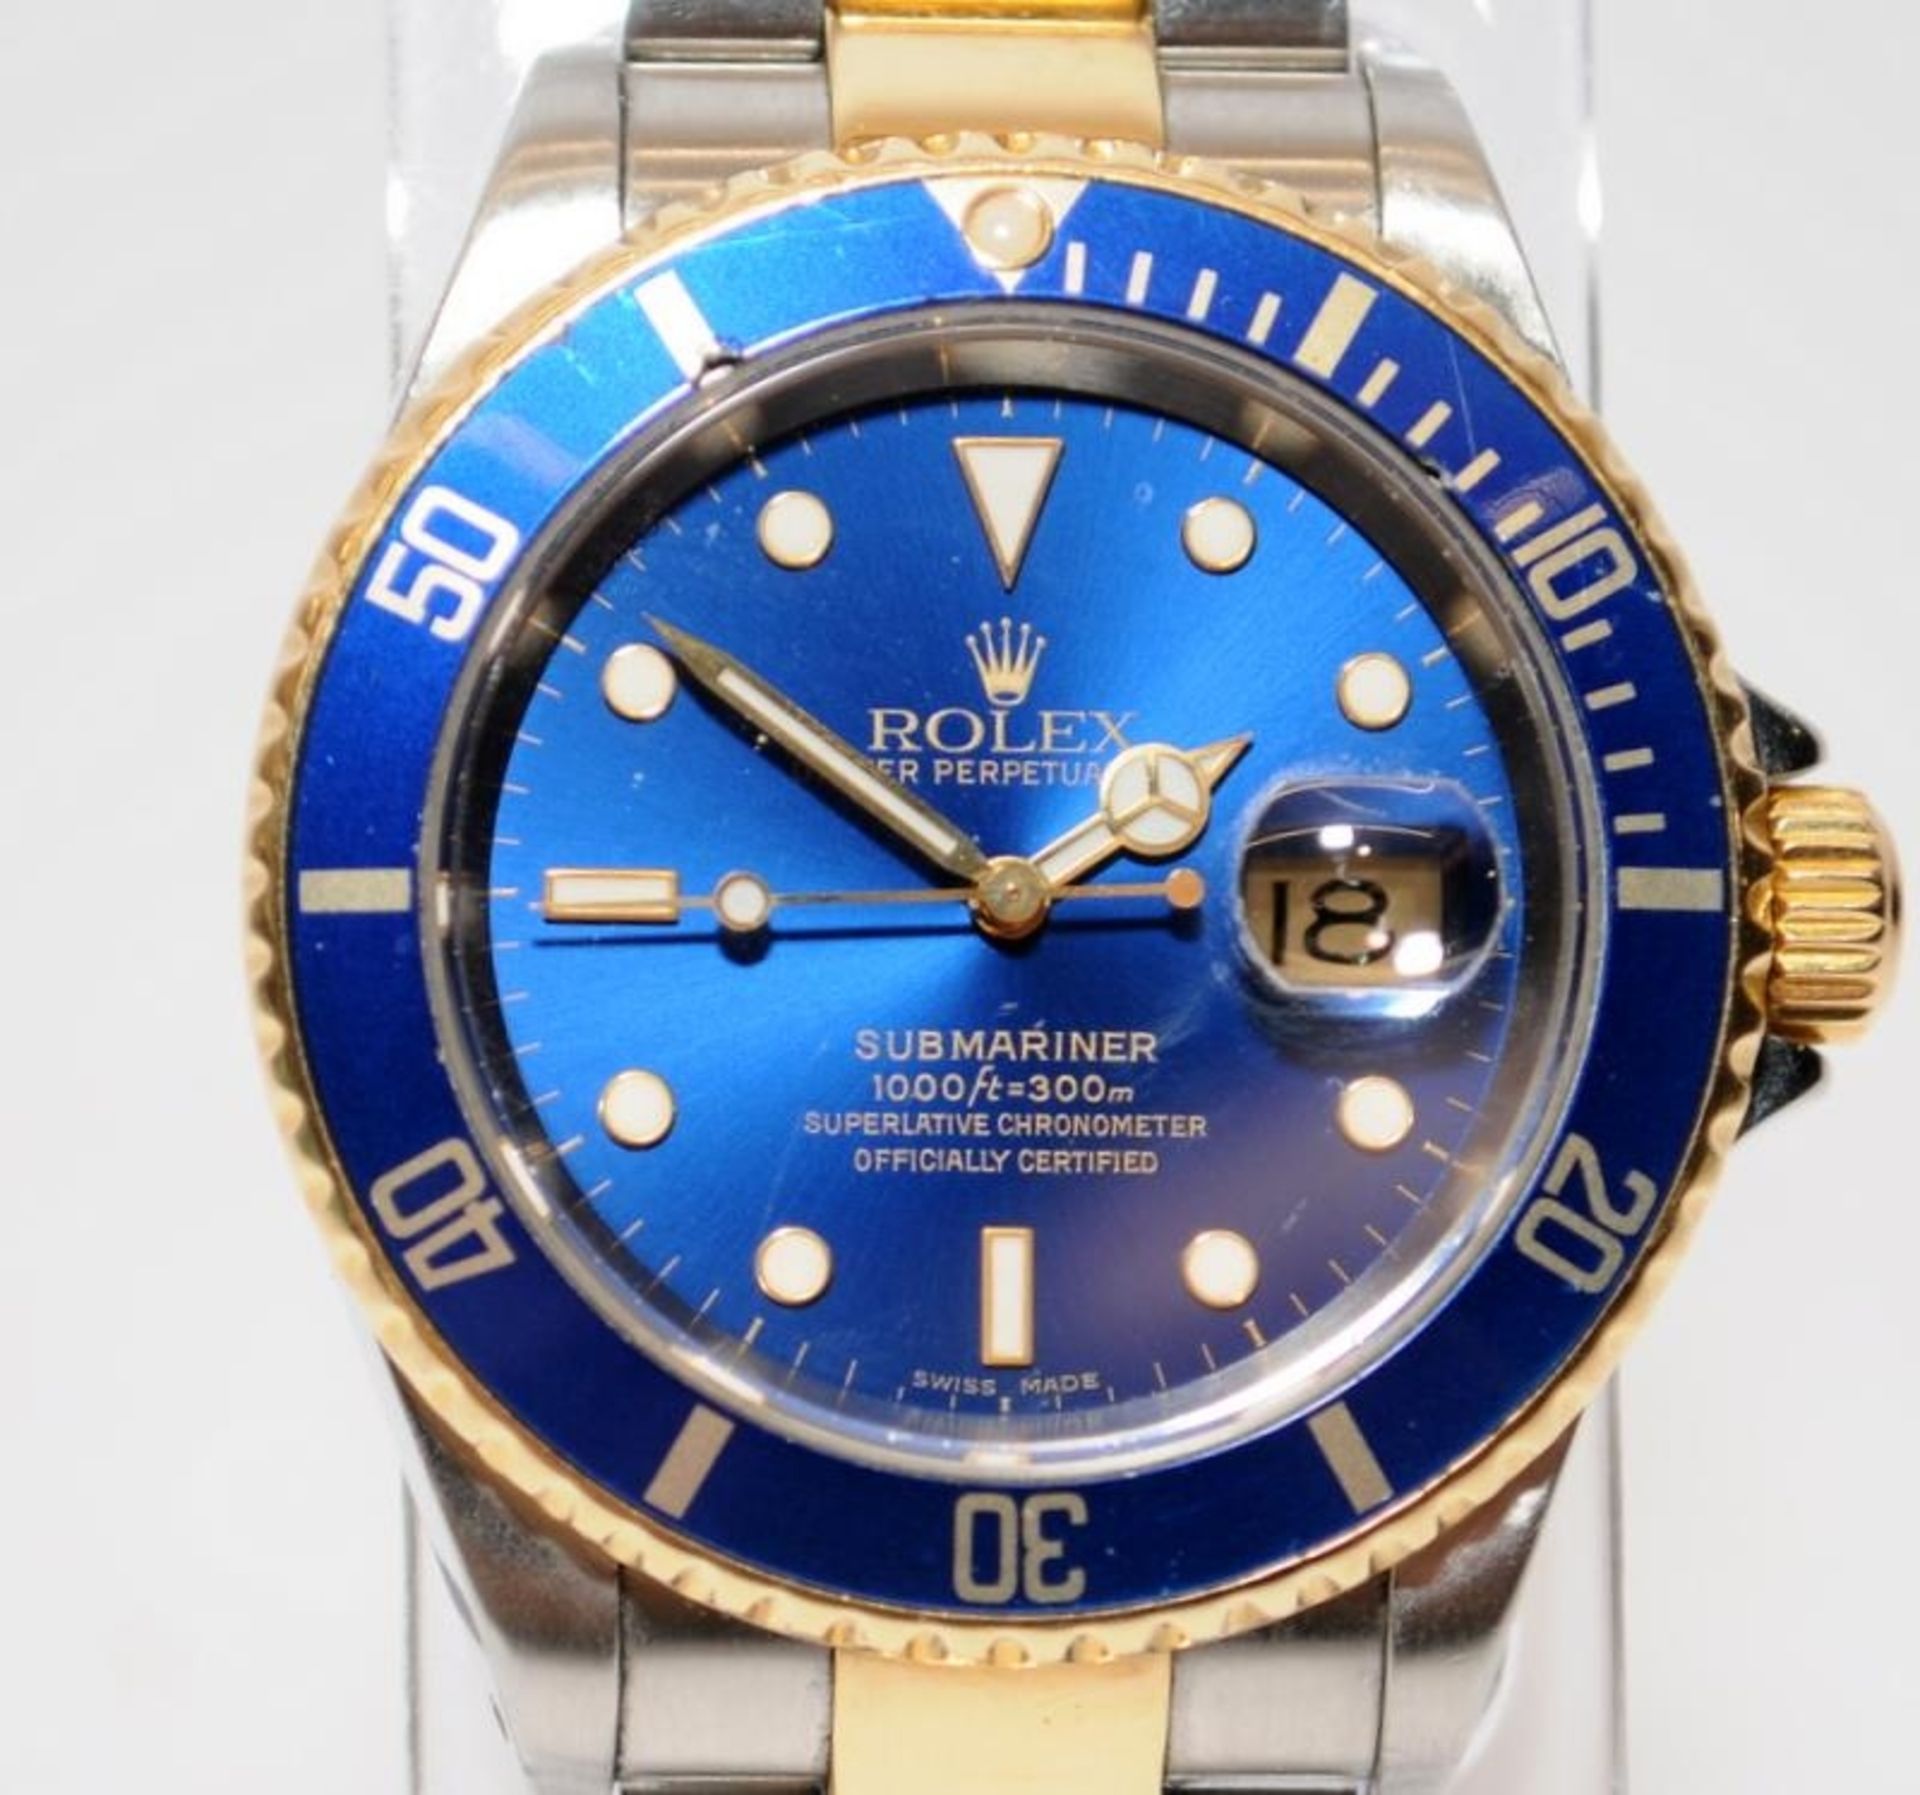 Gents Rolex Oyster Perpetual Date Submariner automatic chronometer, model number 16613. Blue dial